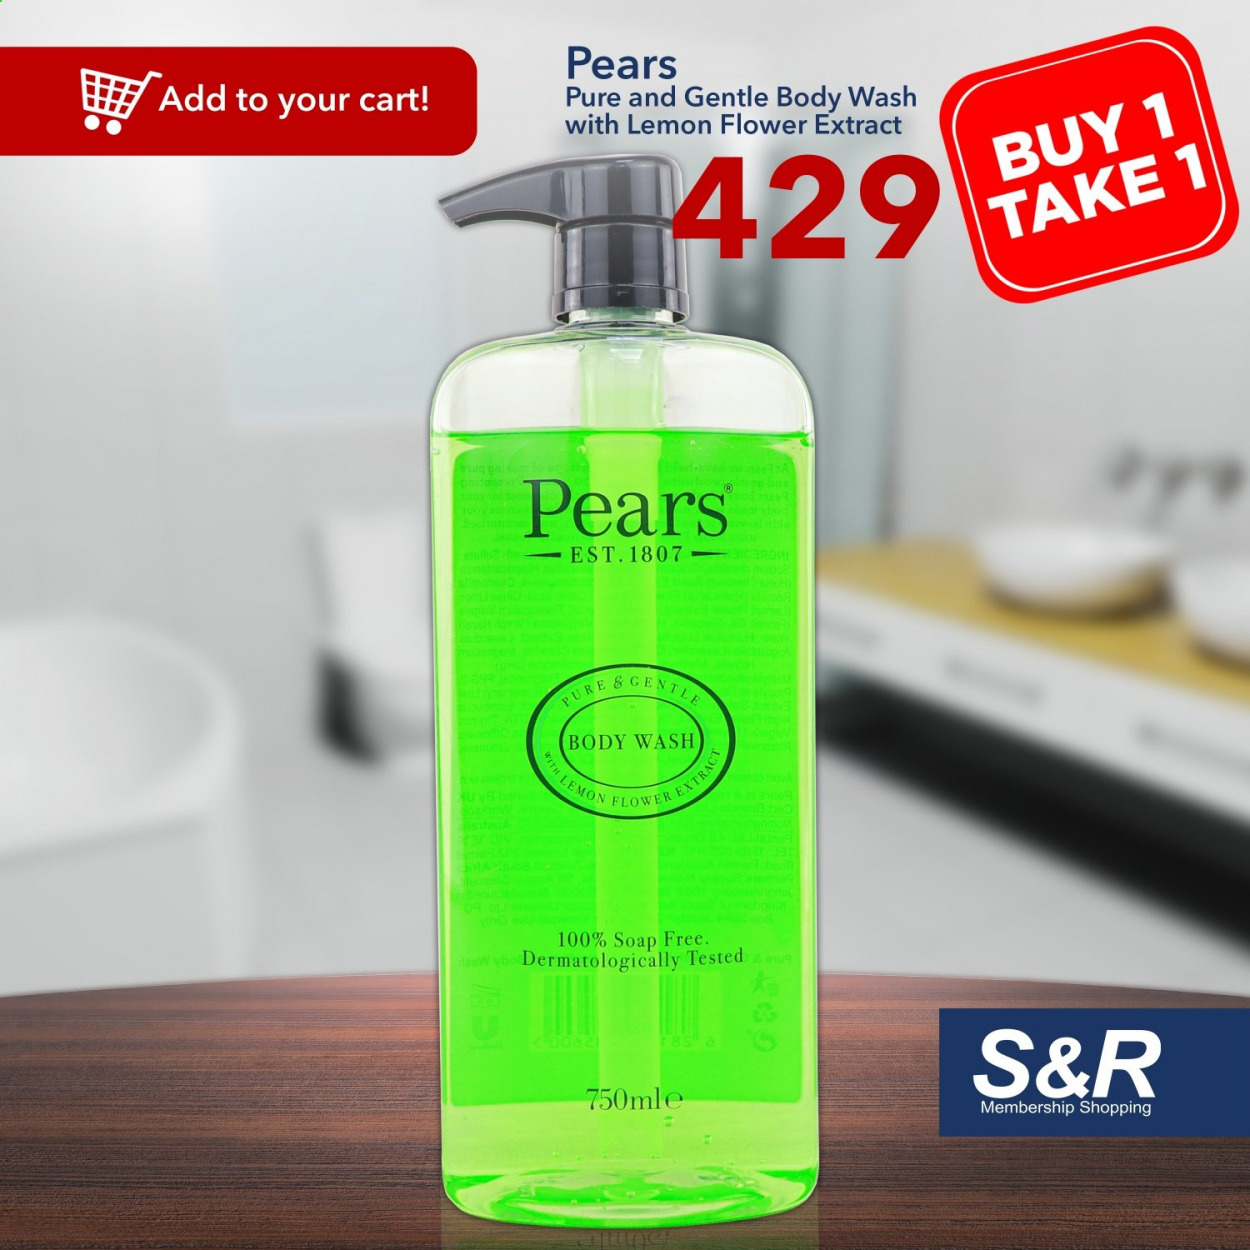 thumbnail - S&R Membership Shopping offer  - Sales products - body wash, soap, cart. Page 2.